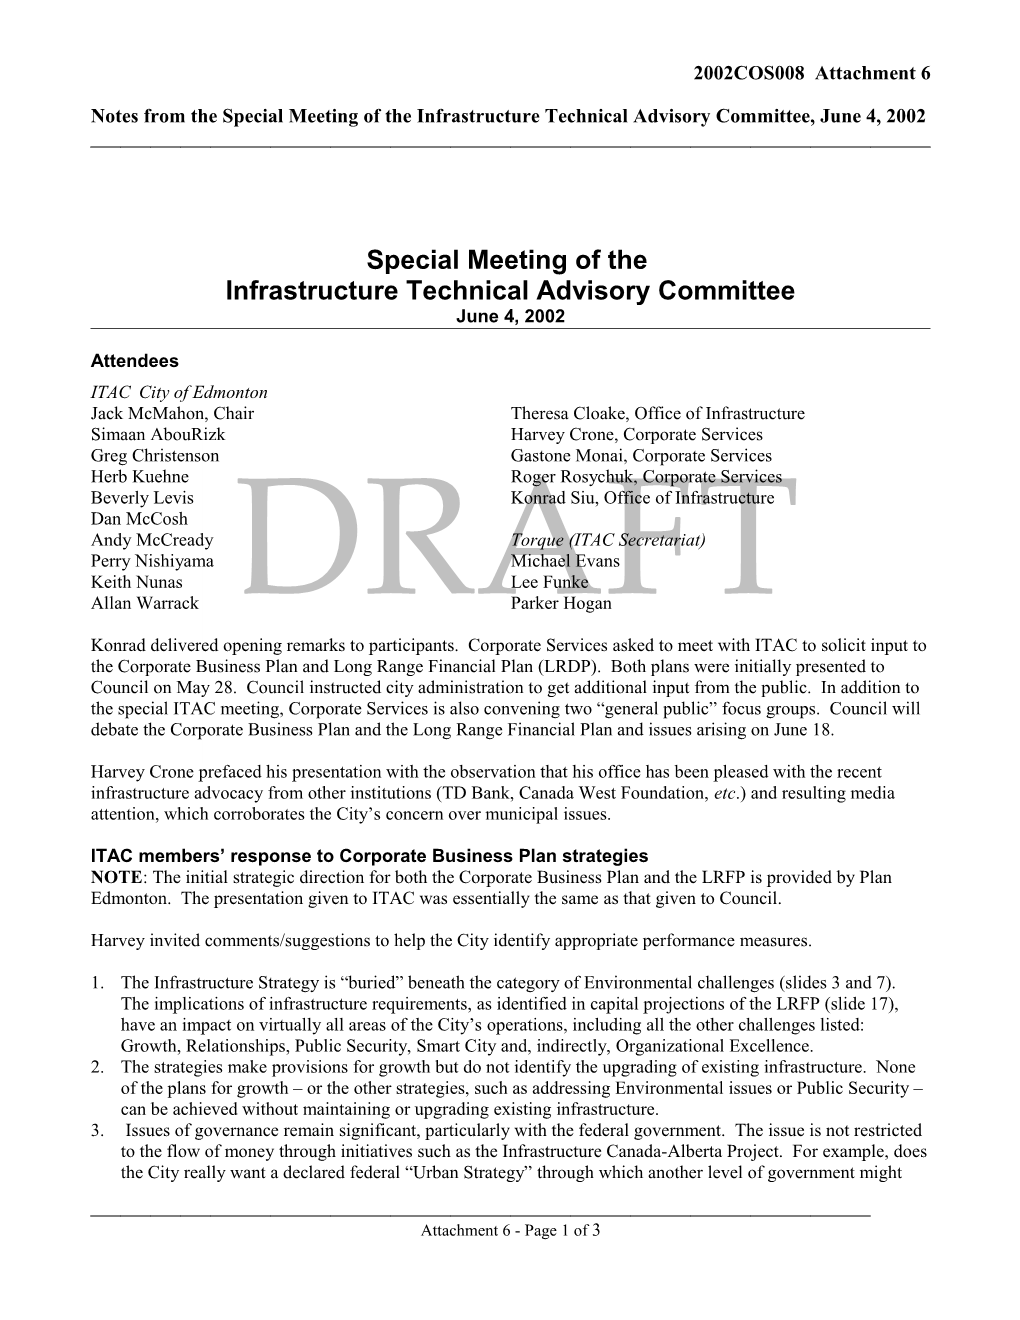 Report for City Council June 18, 2002 Meeting